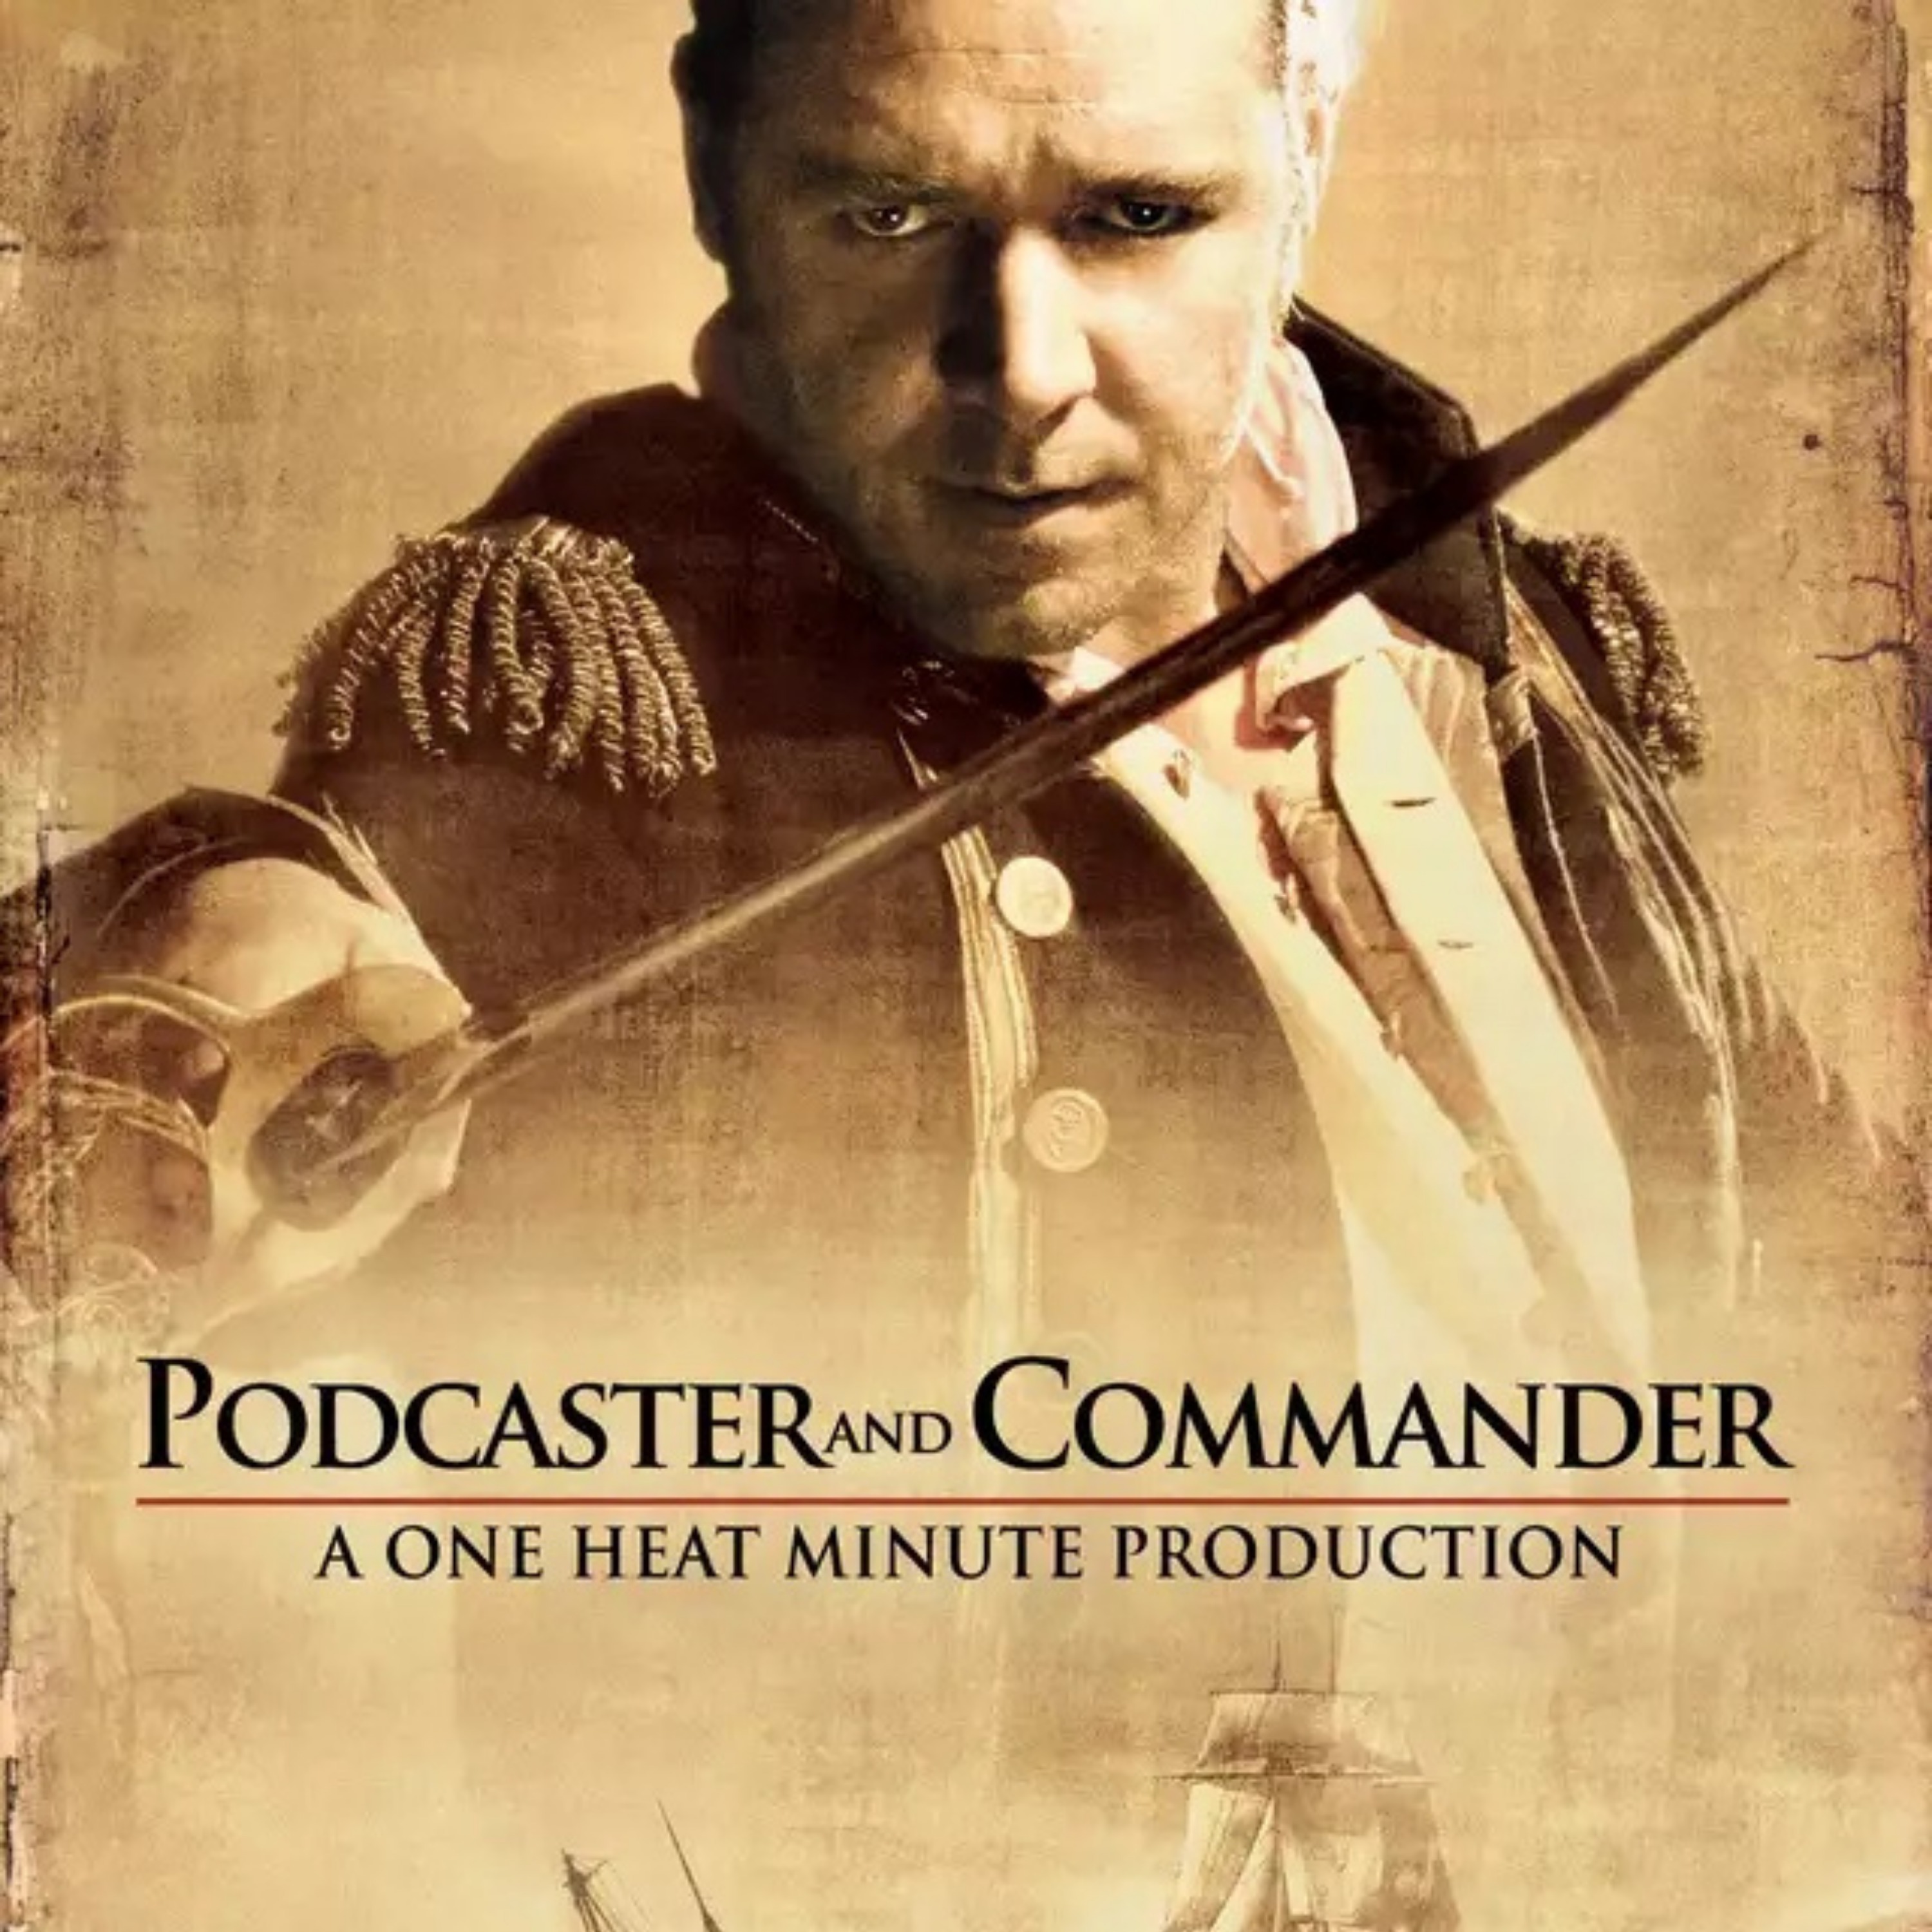 PODCASTER AND COMMANDER: Jumping aboard the H.M.S Surprise